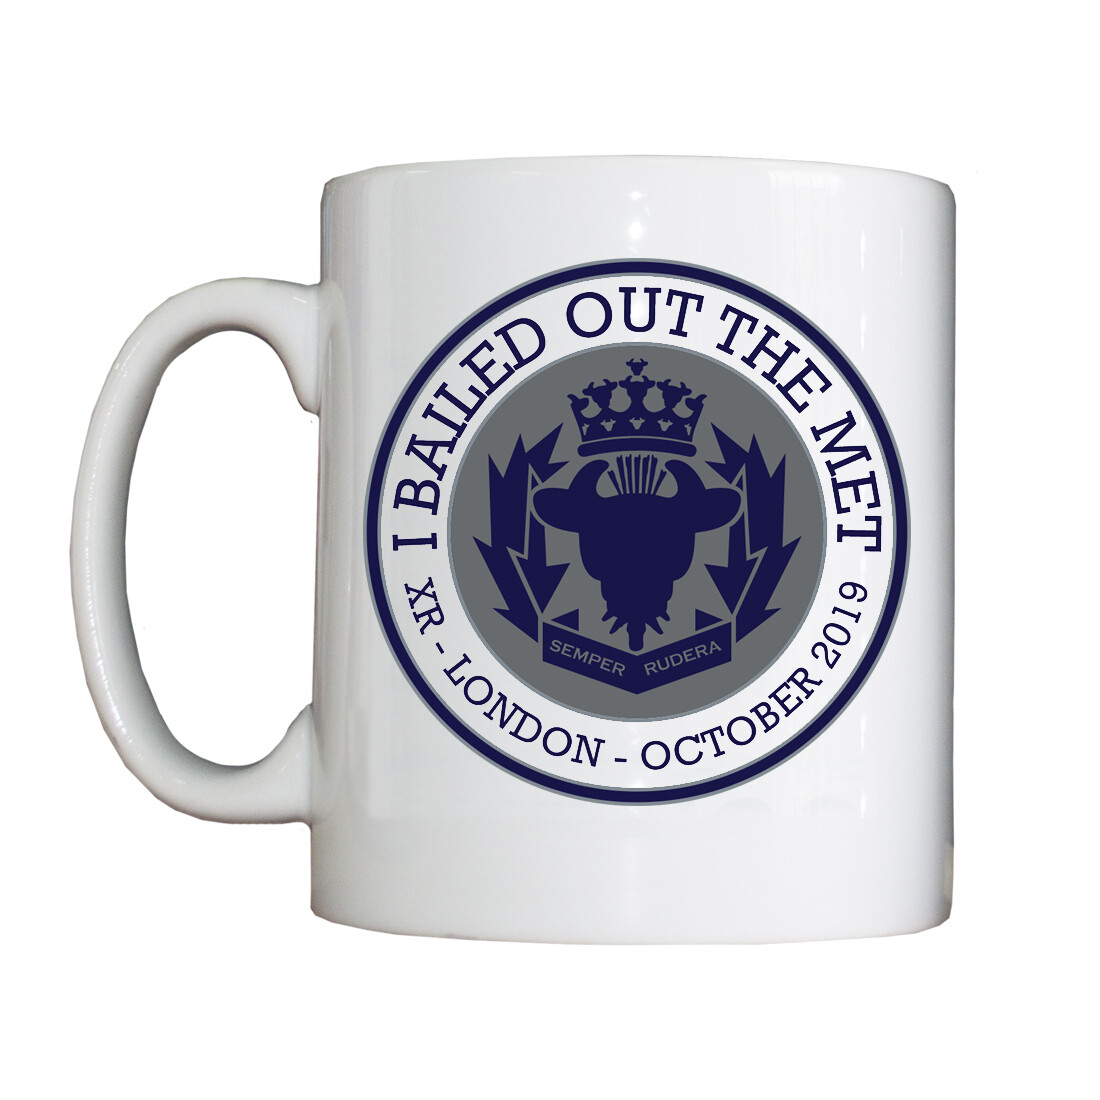 Personalised 'I Bailed Out The Met [Polis Bullshire]' Drinking Vessel